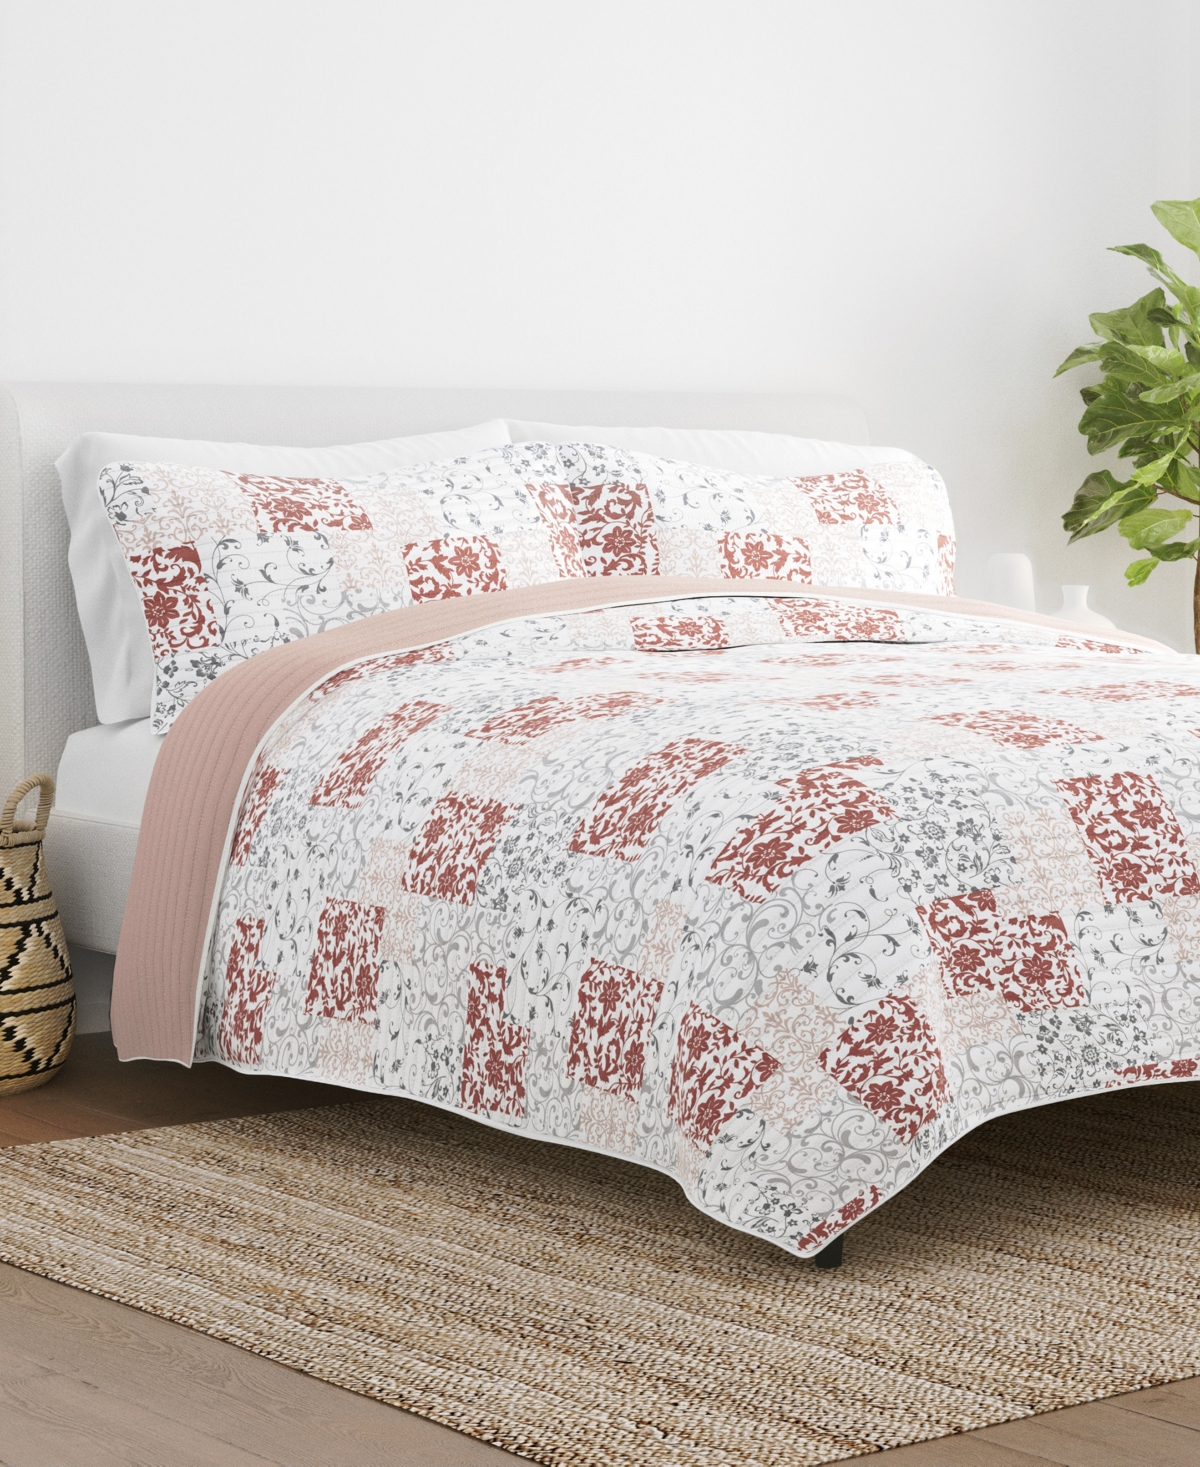 Ienjoy Home All Season 3 Piece Scrolled Patchwork Reversible Quilt Set, King/california King In Blush